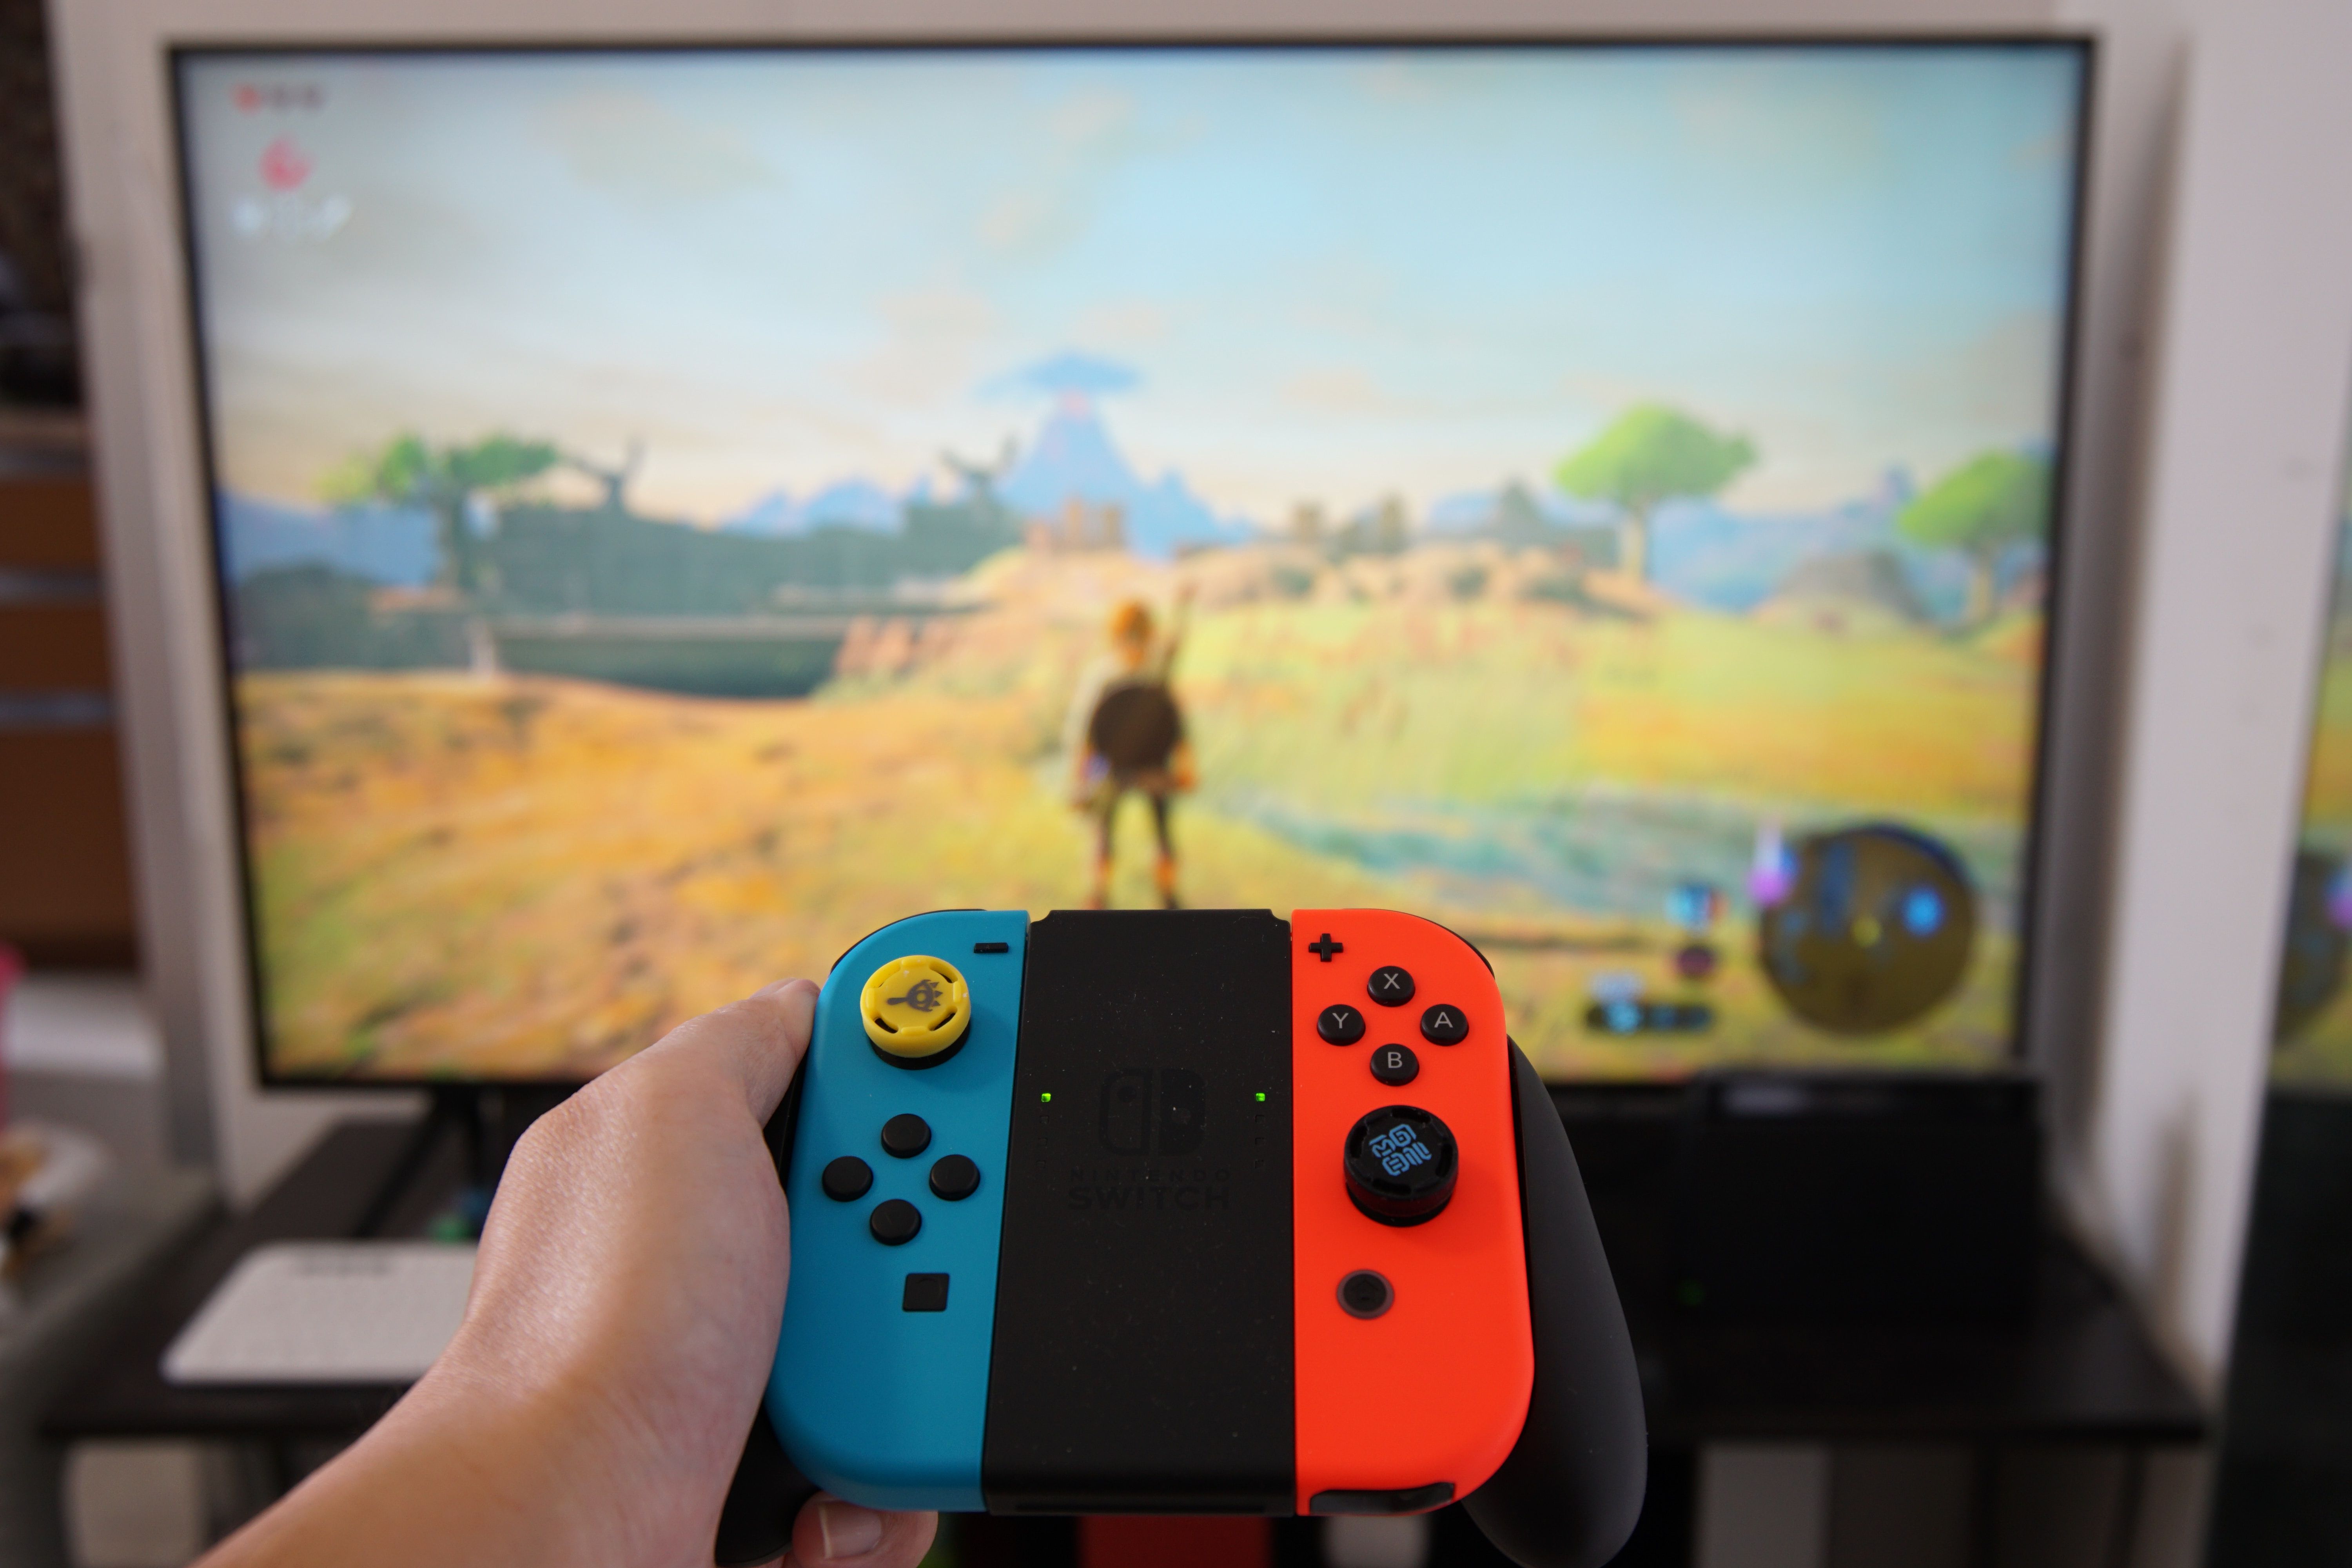 If you want to play on the tv choose Nintendo Switch today